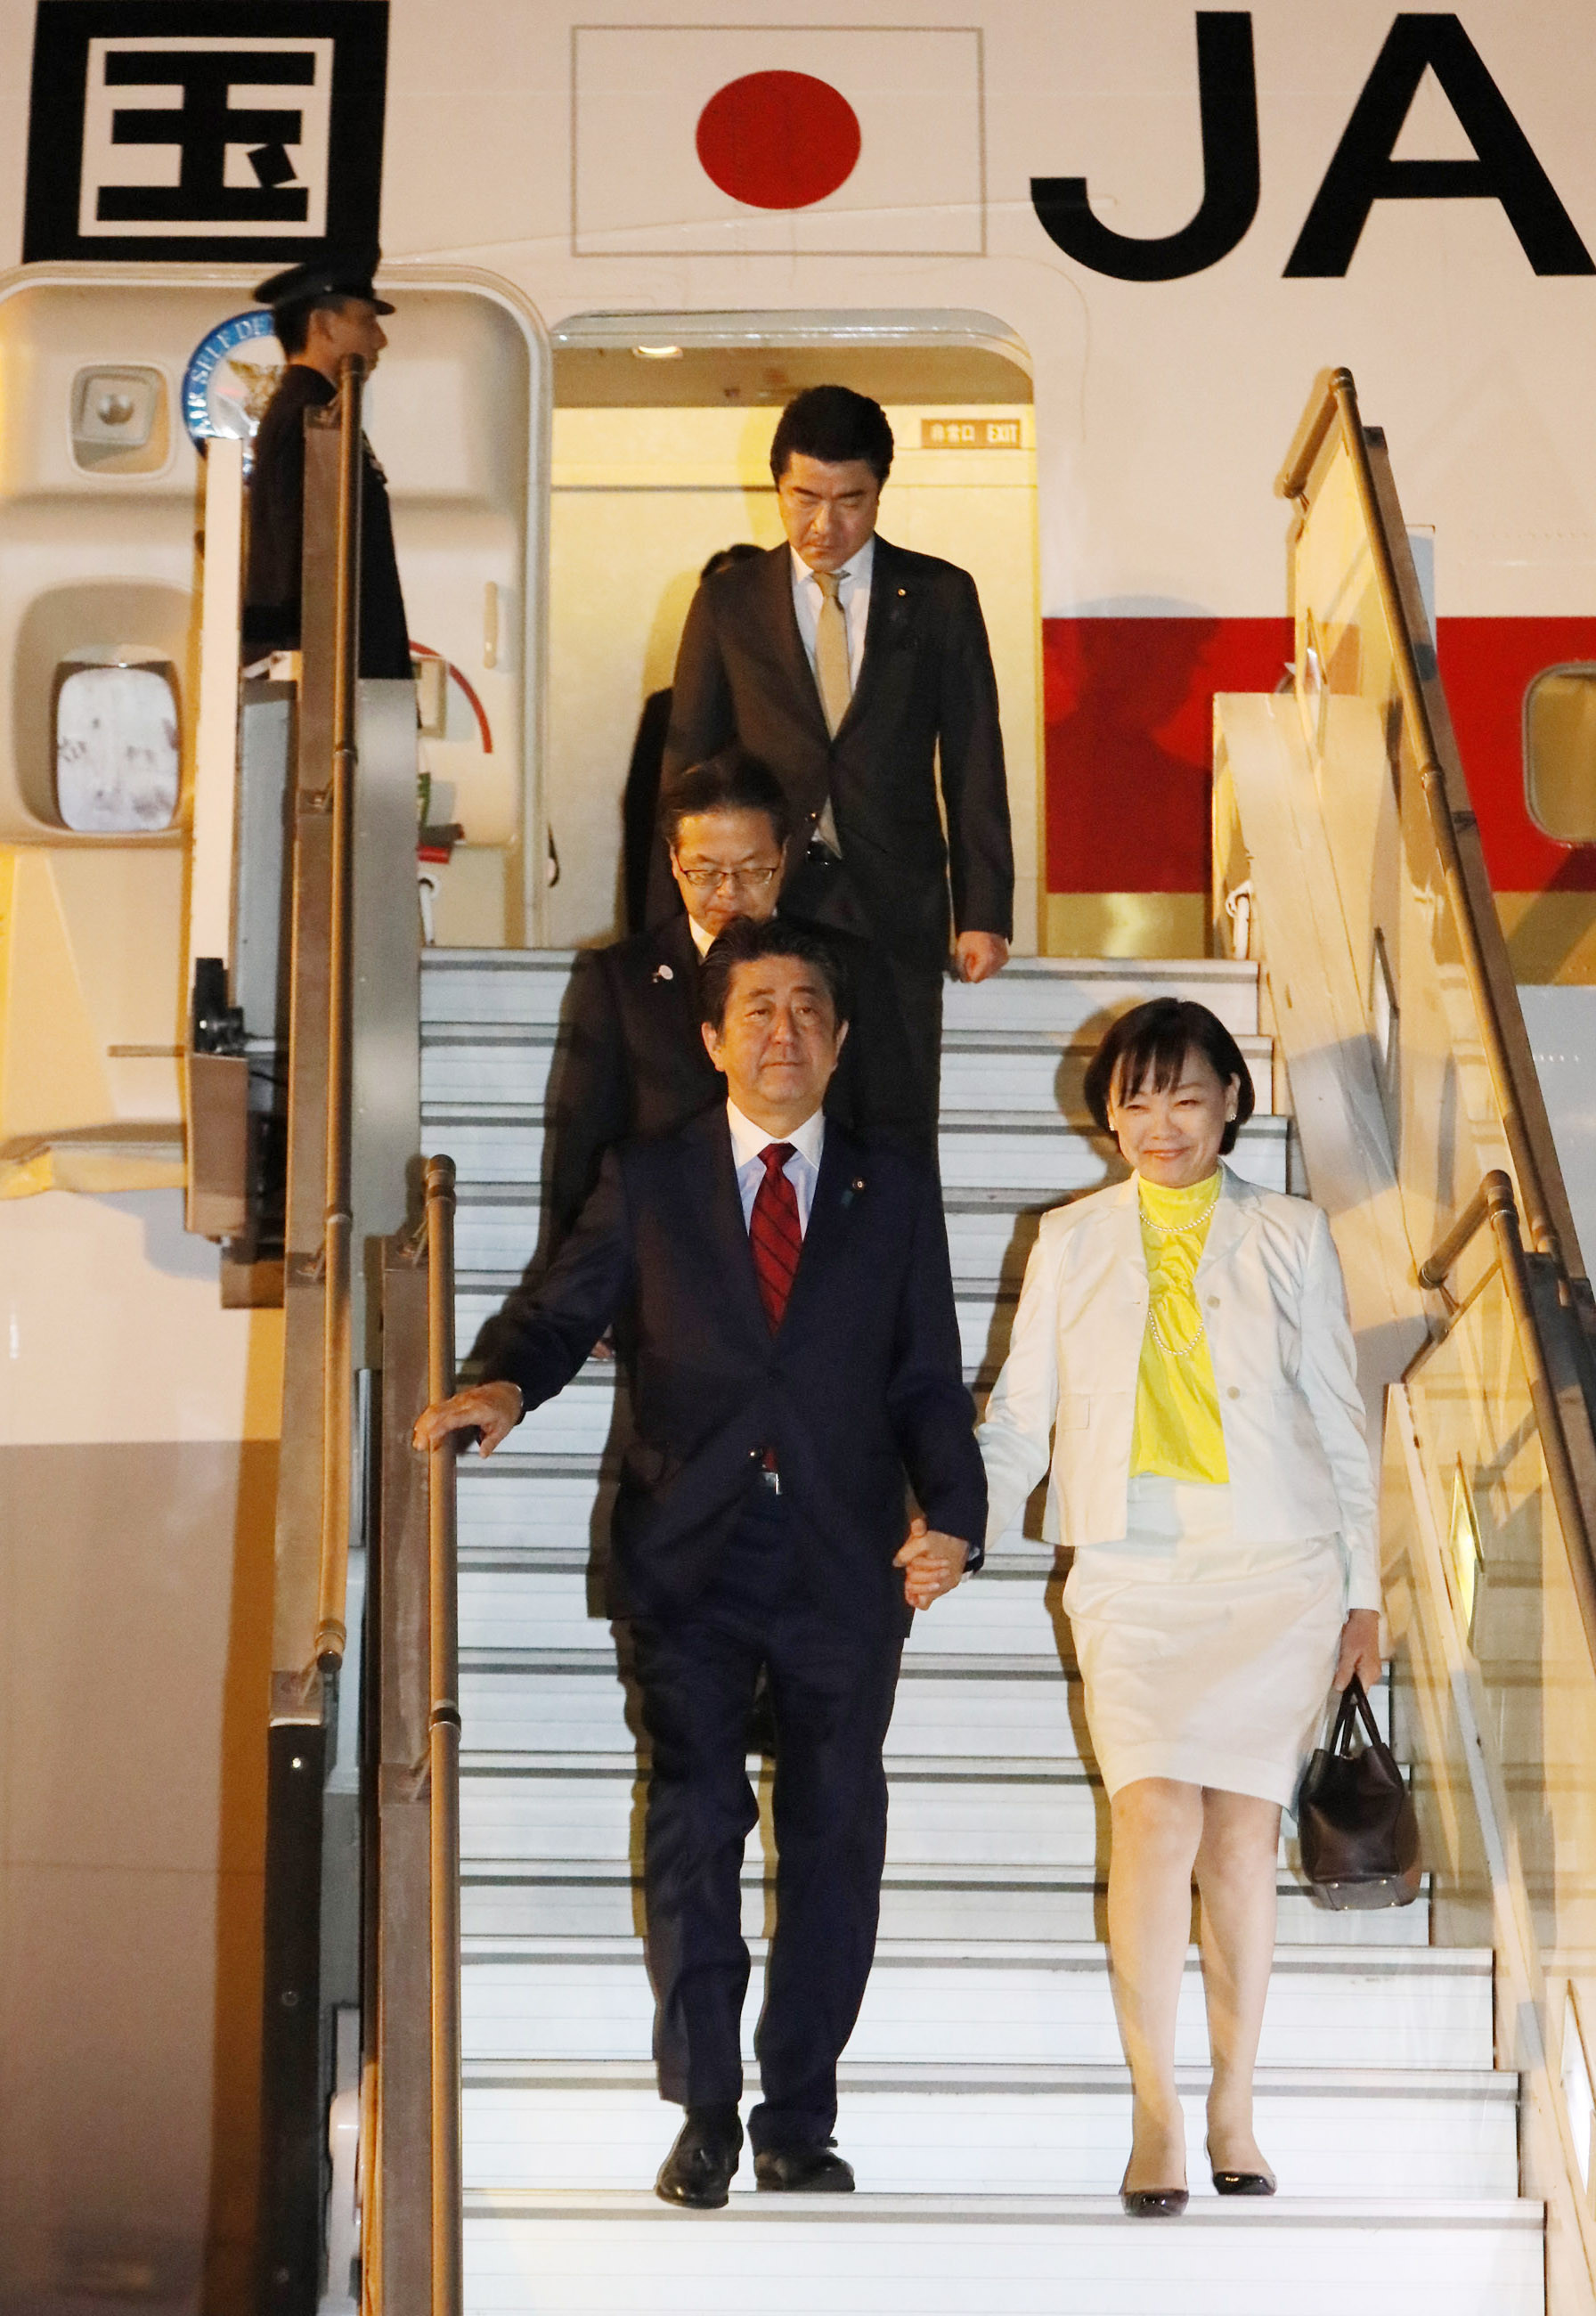 Photograph of the Prime Minister arriving in Argentina (1)